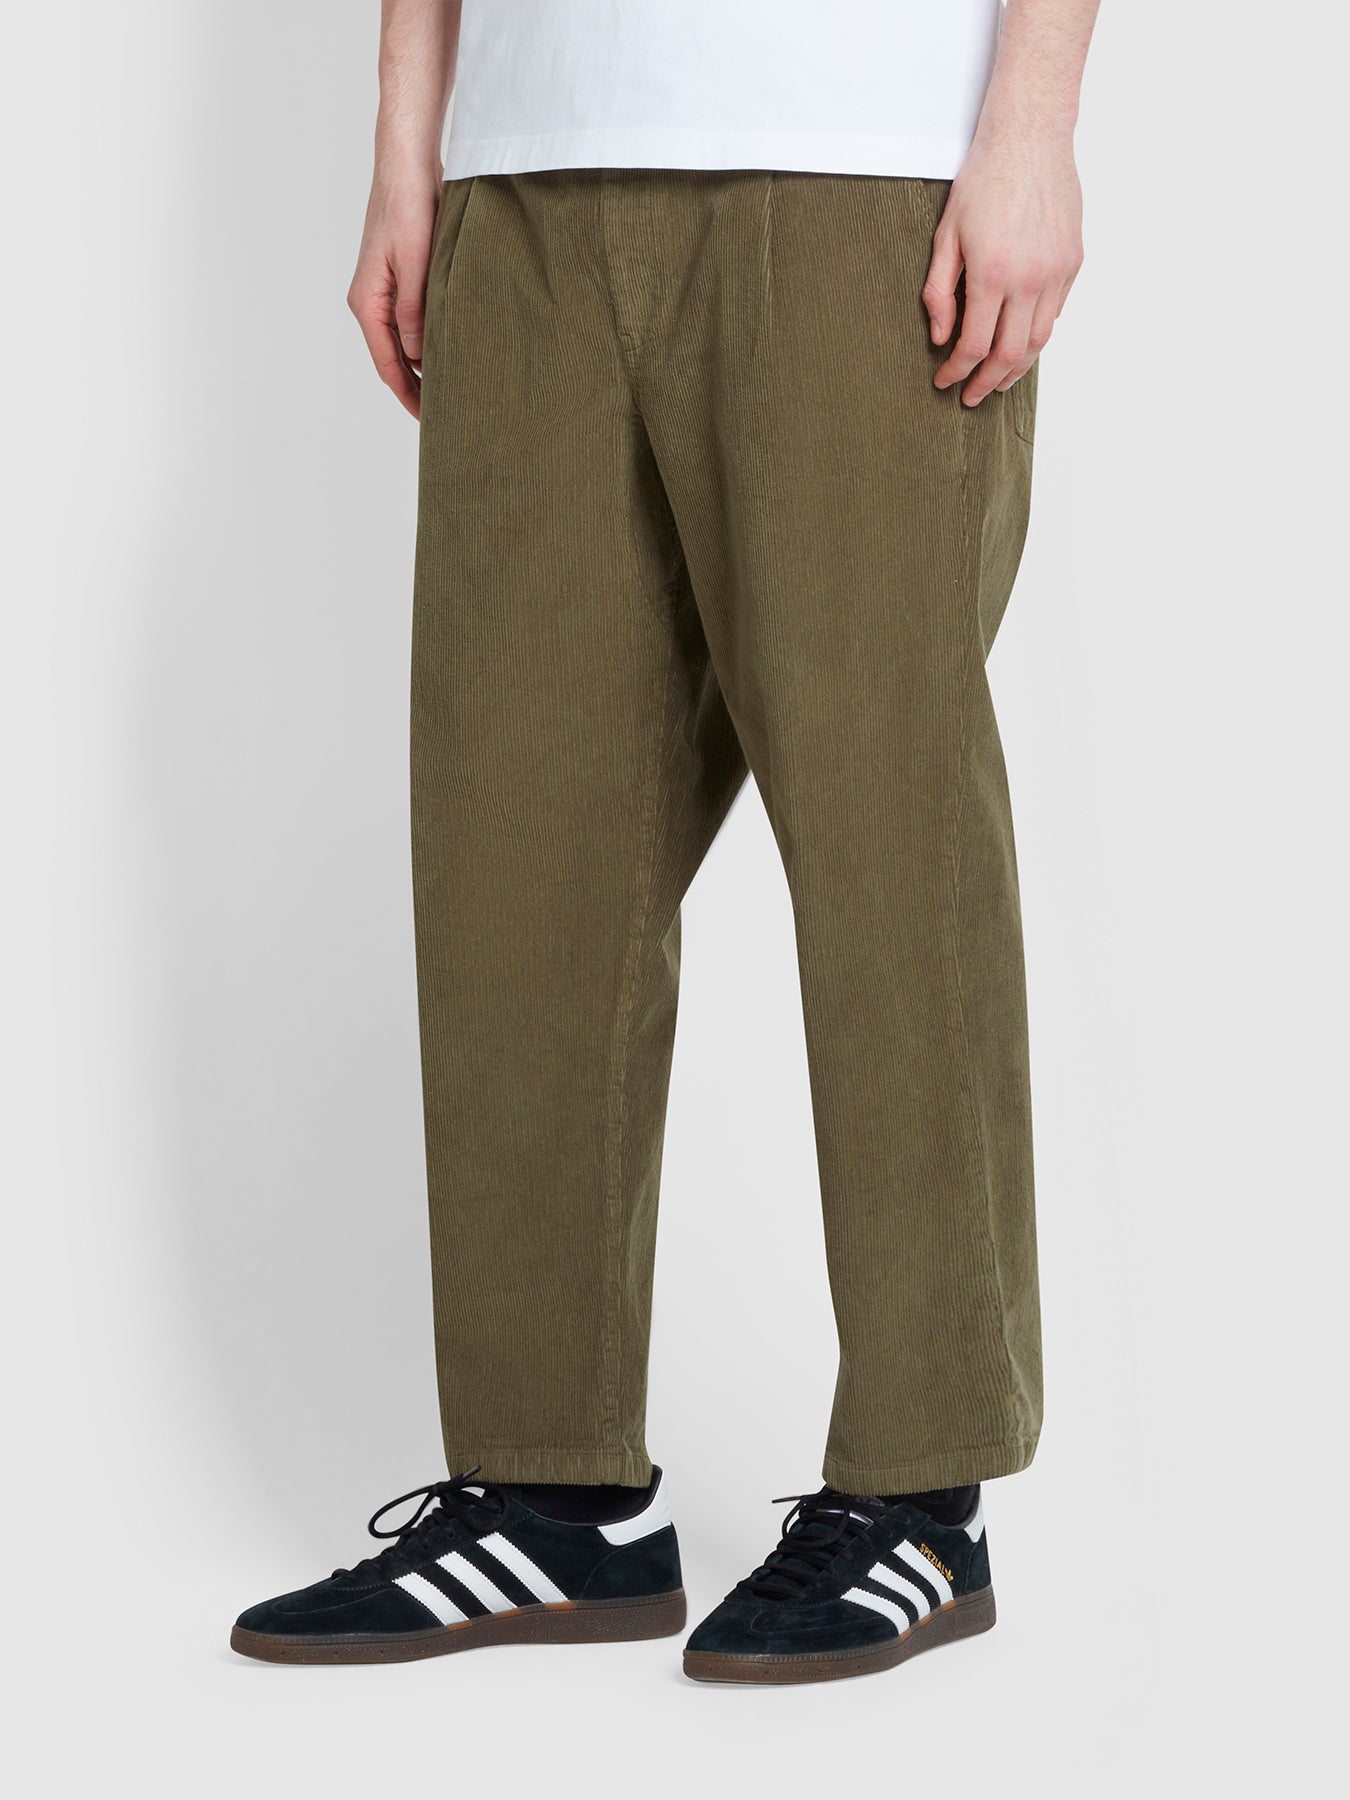 View Greenport Tapered Fit Trousers In Olive Green information